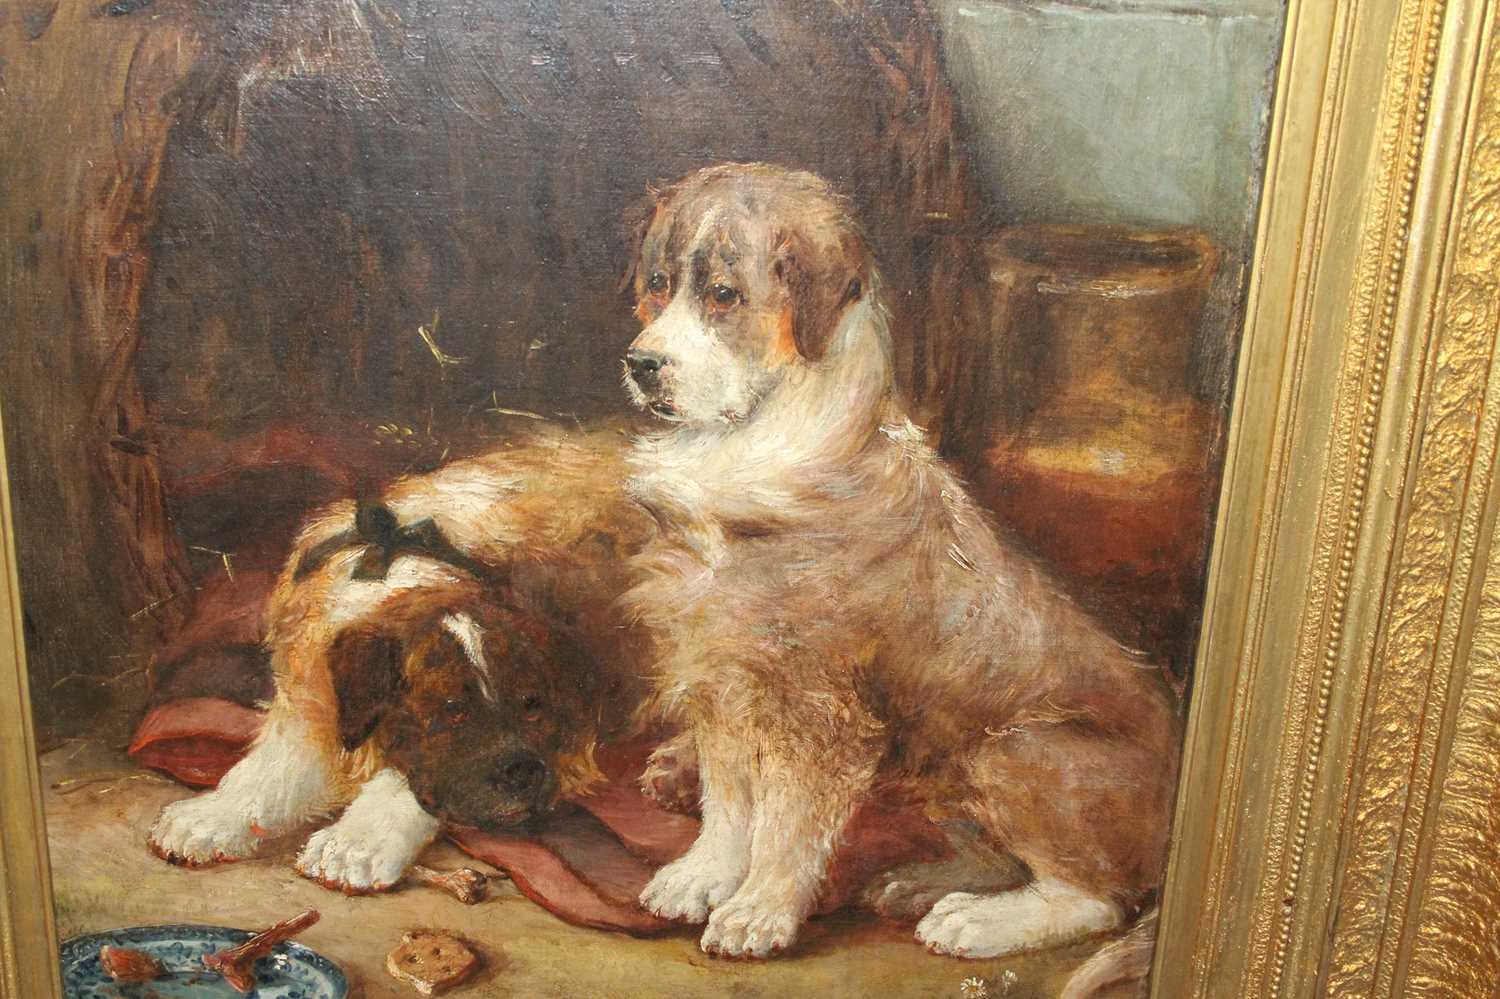 Edwin Frederick Holt (1830-1912) - St Bernards at Feeding Time, oil on canvas, signed and dated - Image 2 of 6